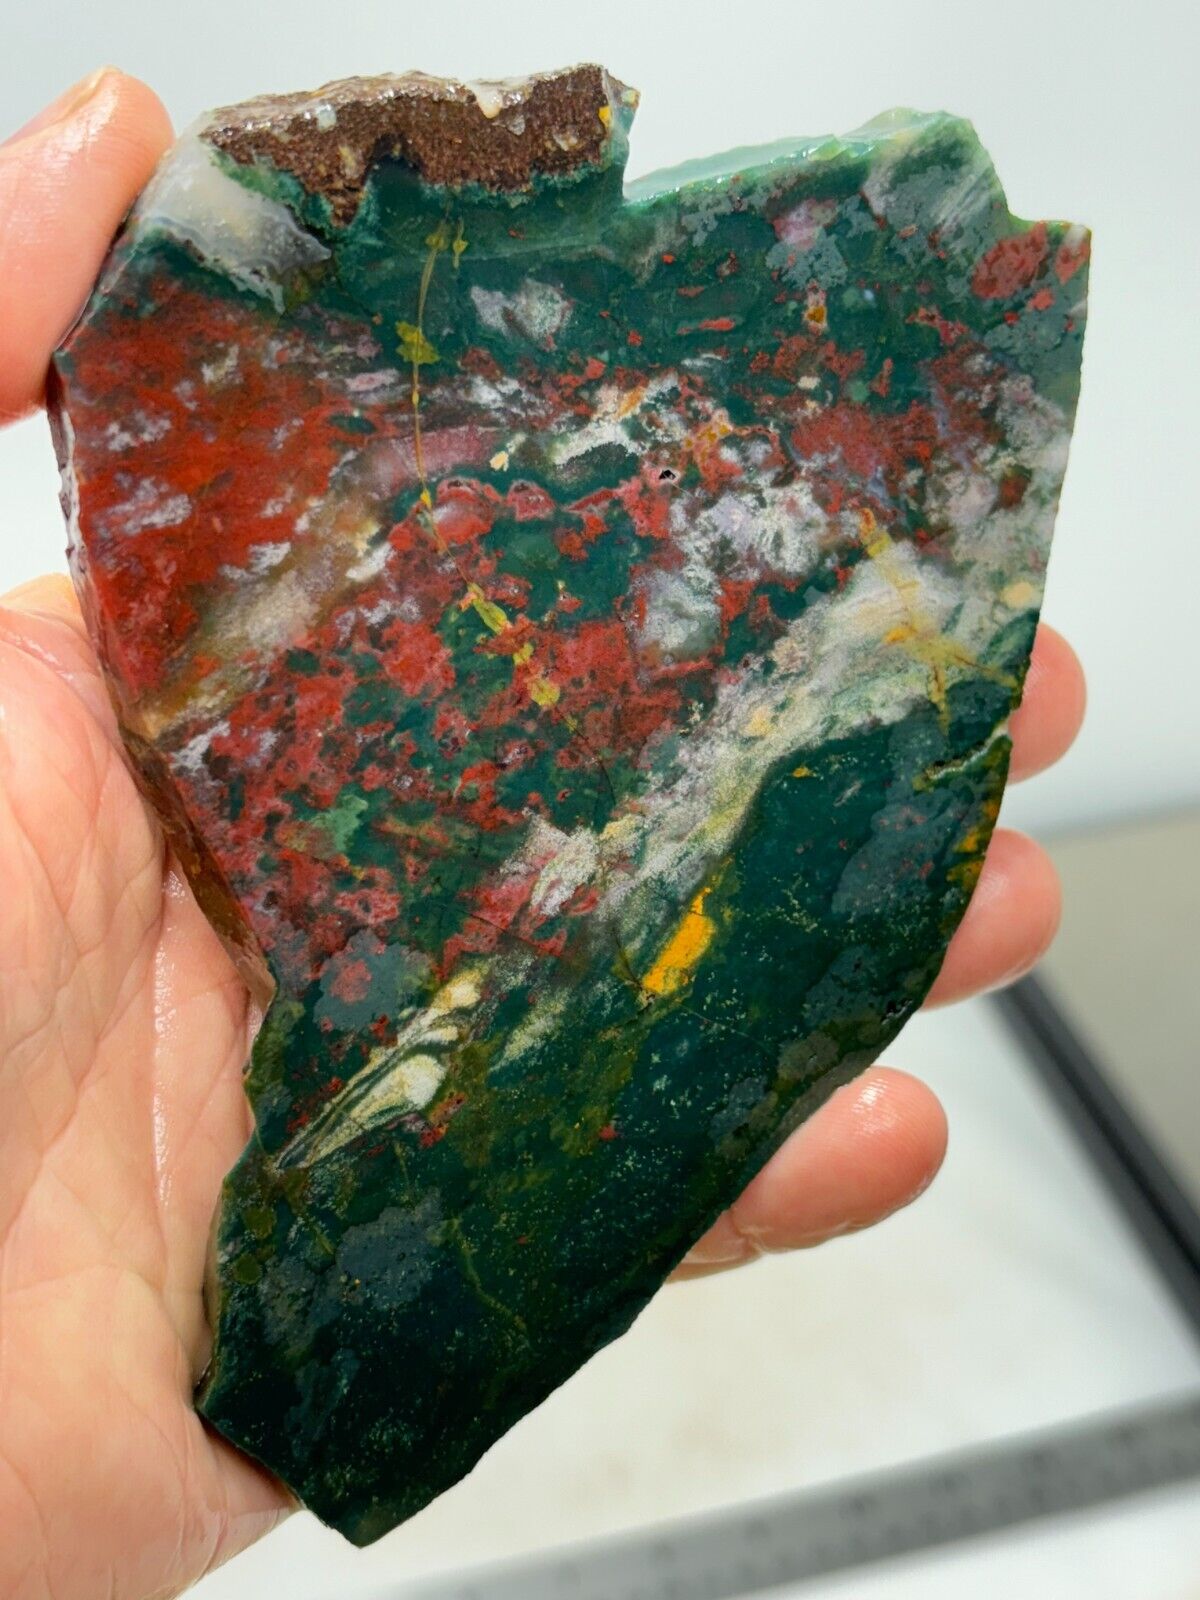 Bloodstone Jasper slab Cabbing Lapidary Collecting Combo Ship Avail